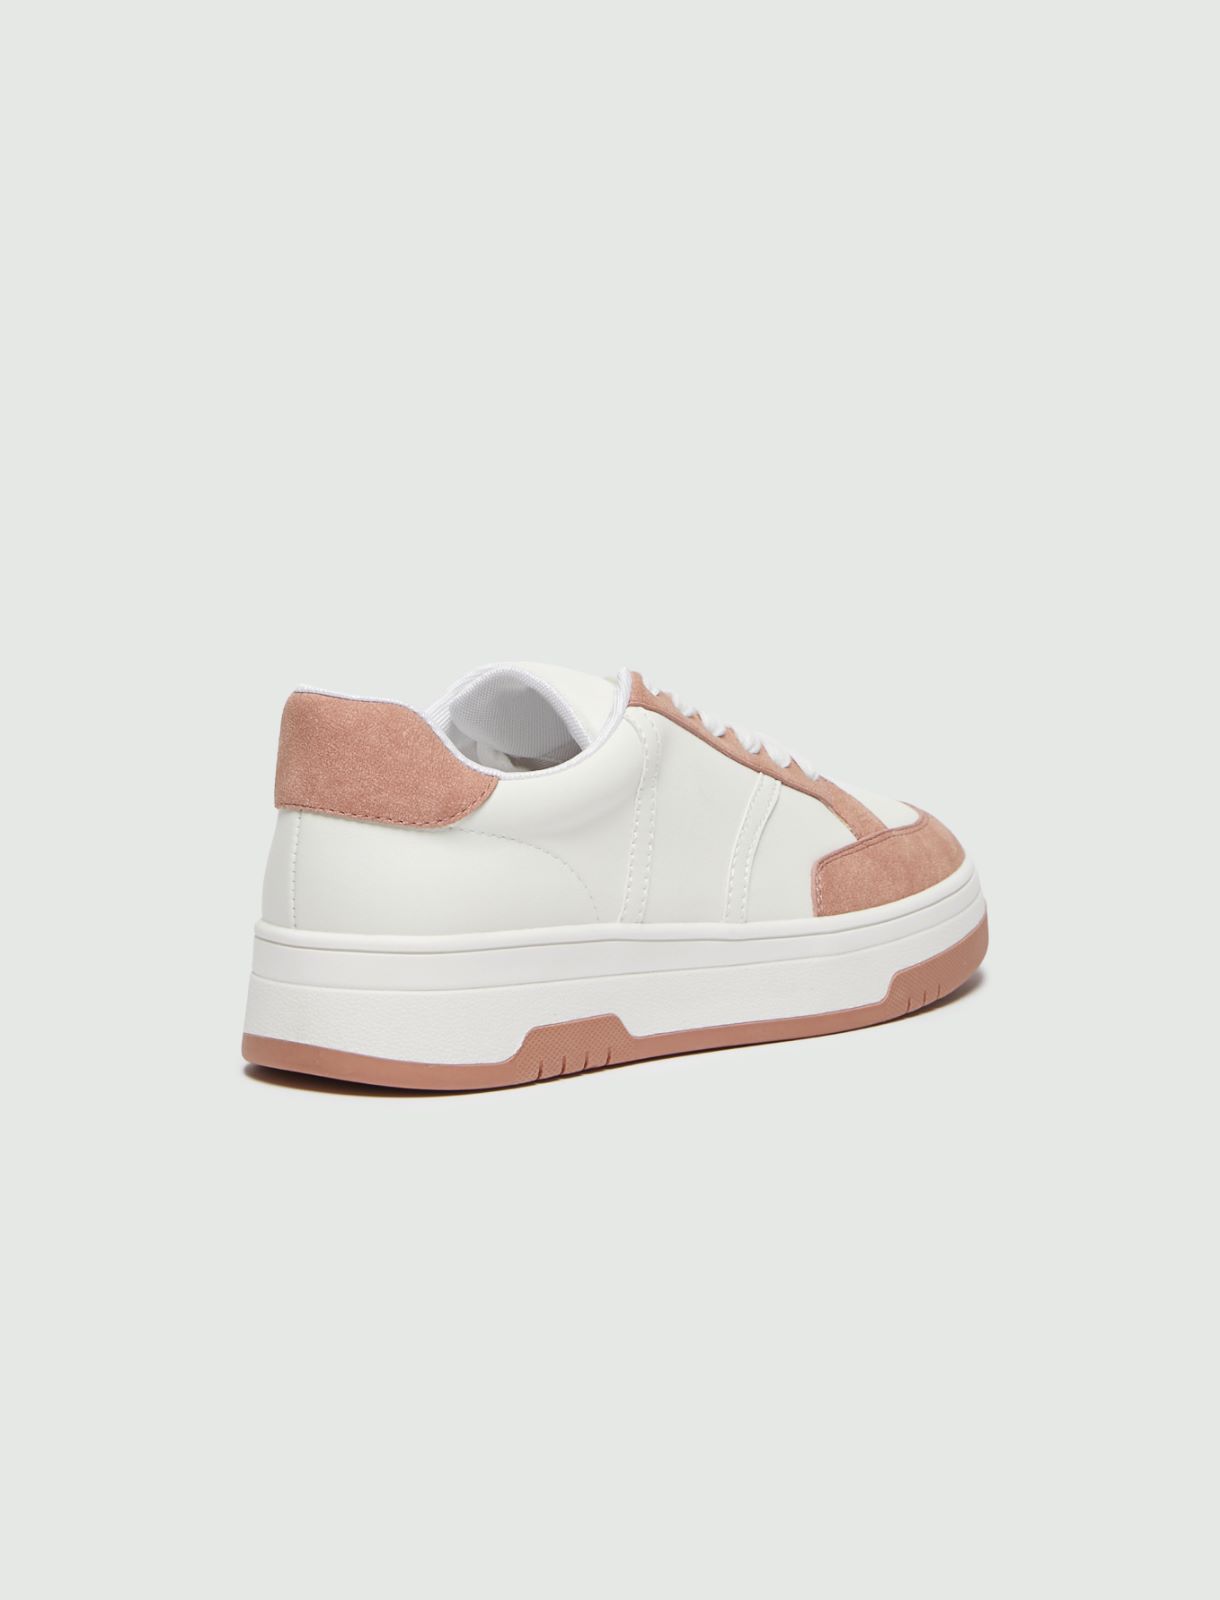 Sneakers with contrast detail - Pink - Marella - 3